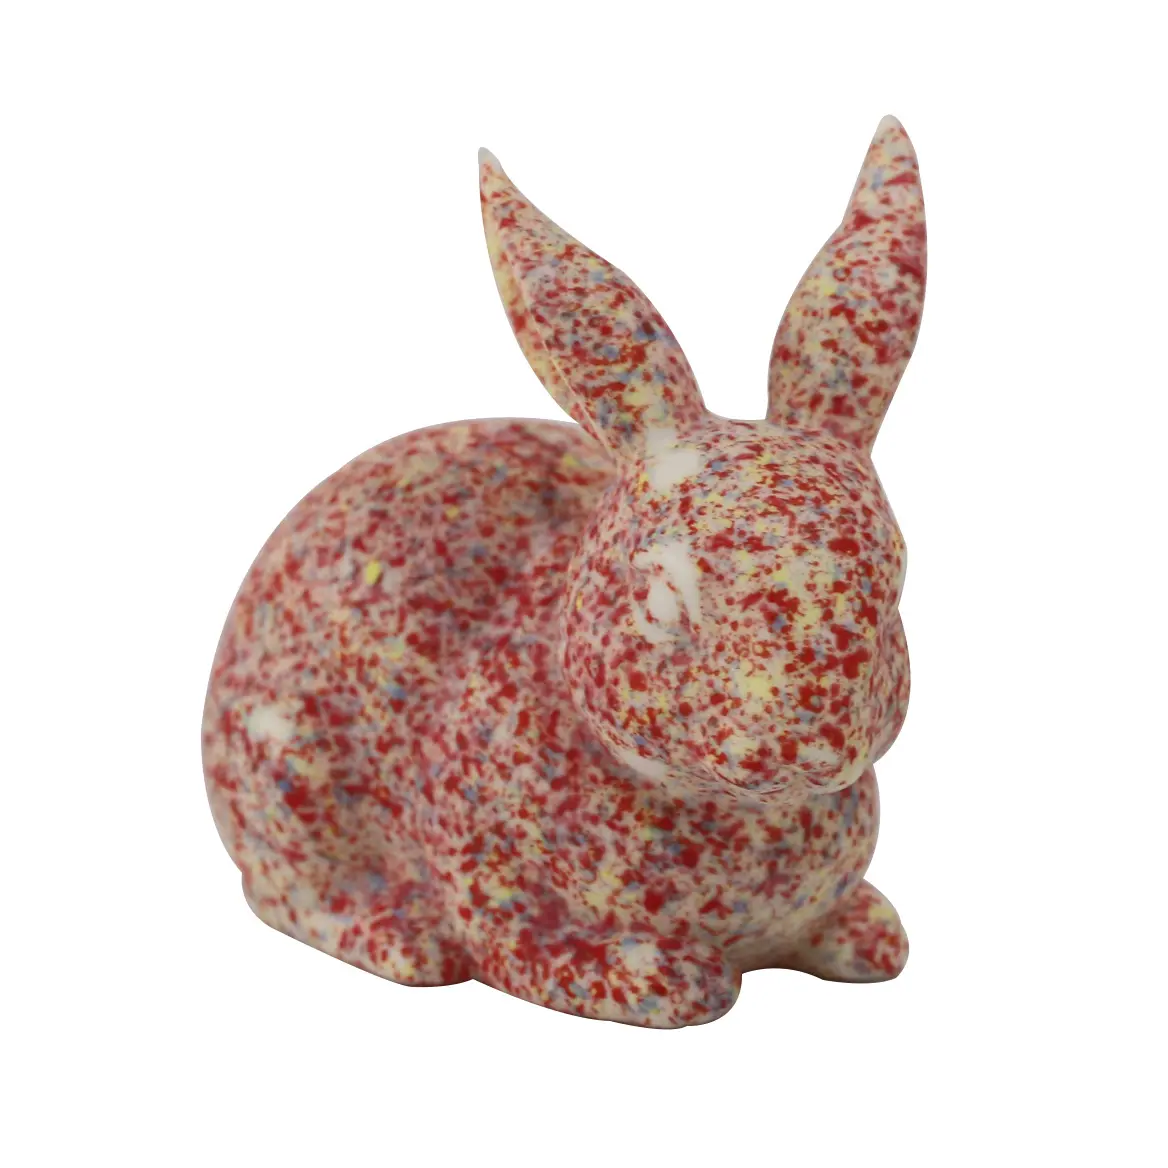 Factory Supply Unique Ceramic Porcelain Rabbit Sculpture Statue Ornament for Easter and Halloween Decoration Birthday Gift